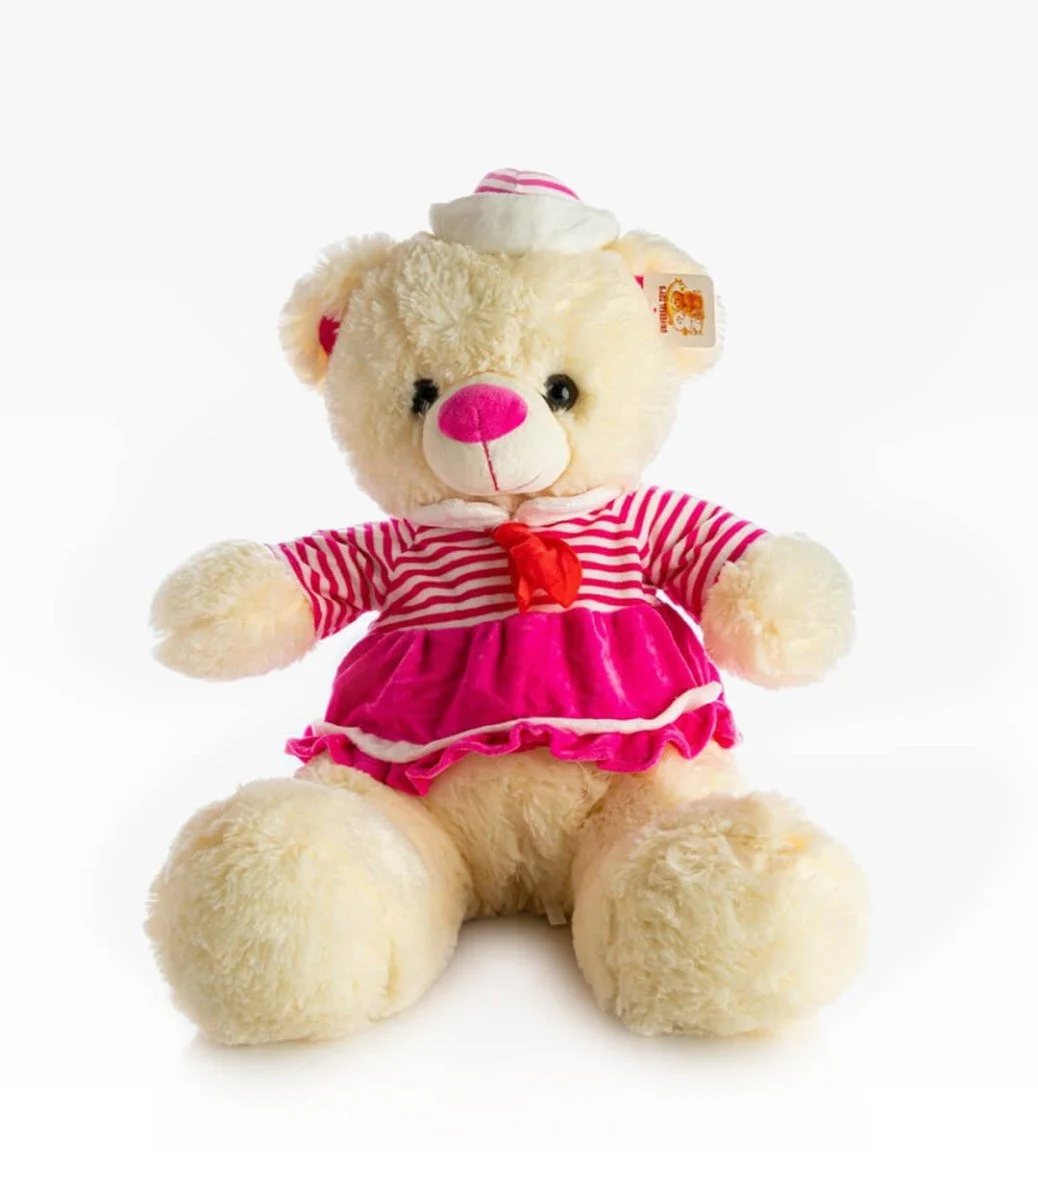 A Teddy Bear For Girls With a Beautiful Dress